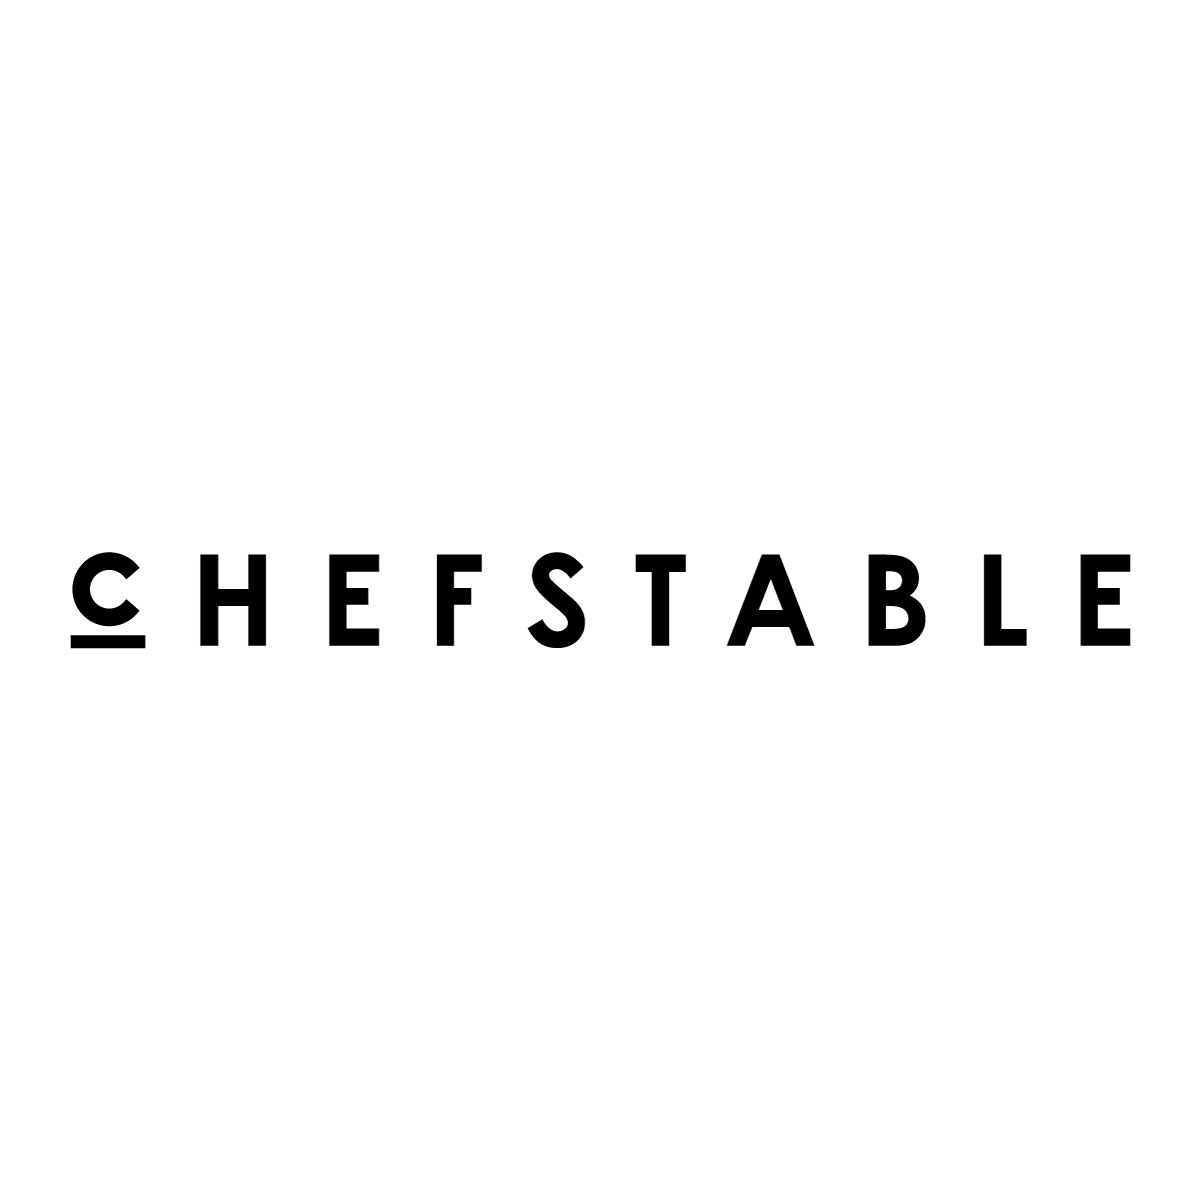 Team | ChefStable — ChefStable